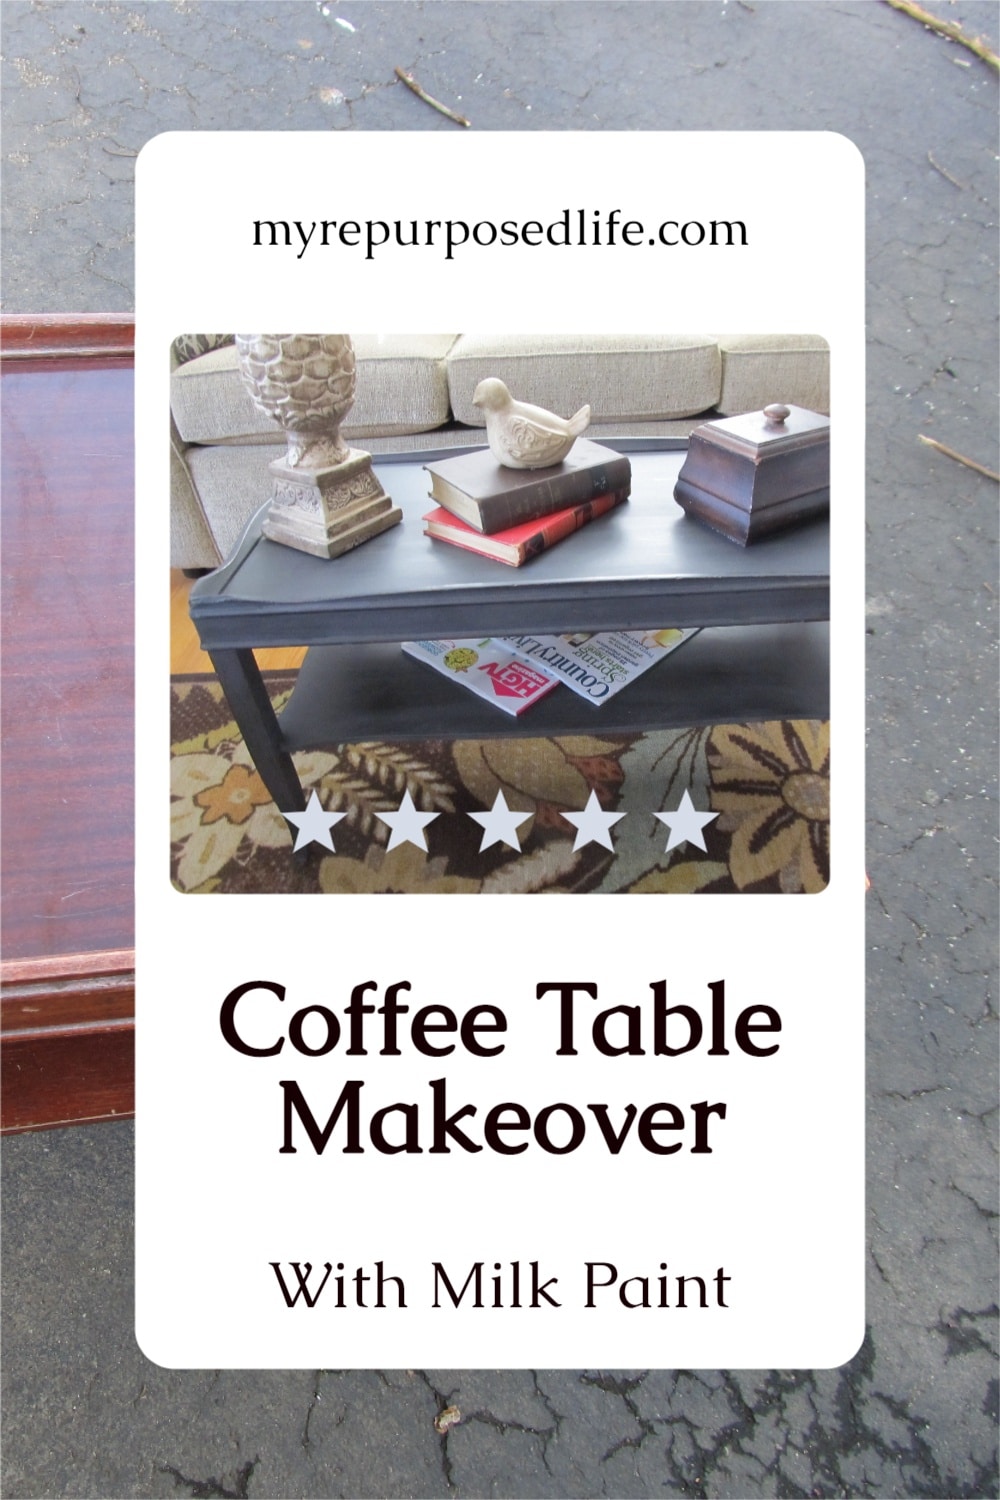 How to do a quick and easy milk paint makeover on a two tiered thrift store coffee table. Easy step by step directions. Do it yourself today! #MyRepurposedLife #upcycle #coffeetable #milkpaint via @repurposedlife